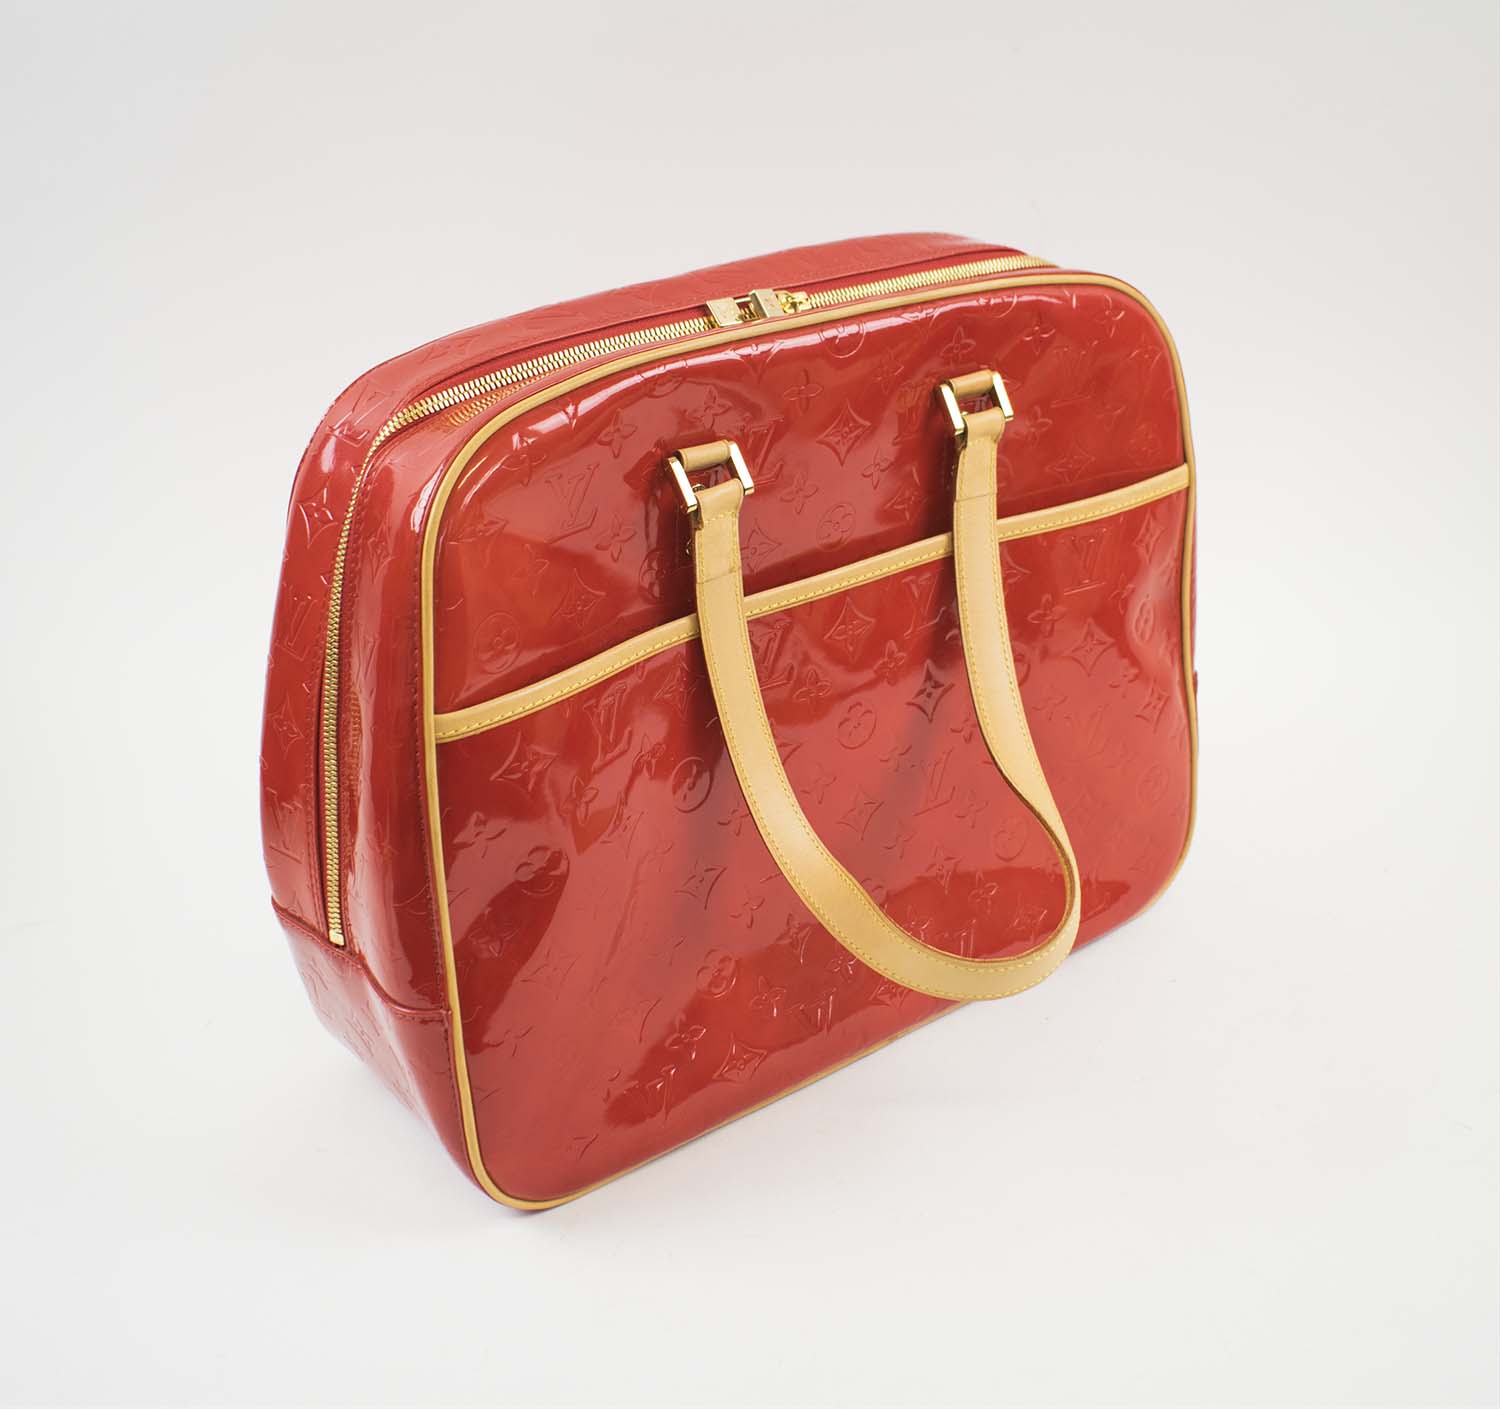 LOUIS VUITTON VERNIS RED MONOGRAM BAG, gold tone hardware, bottom feet, leather trims and ...